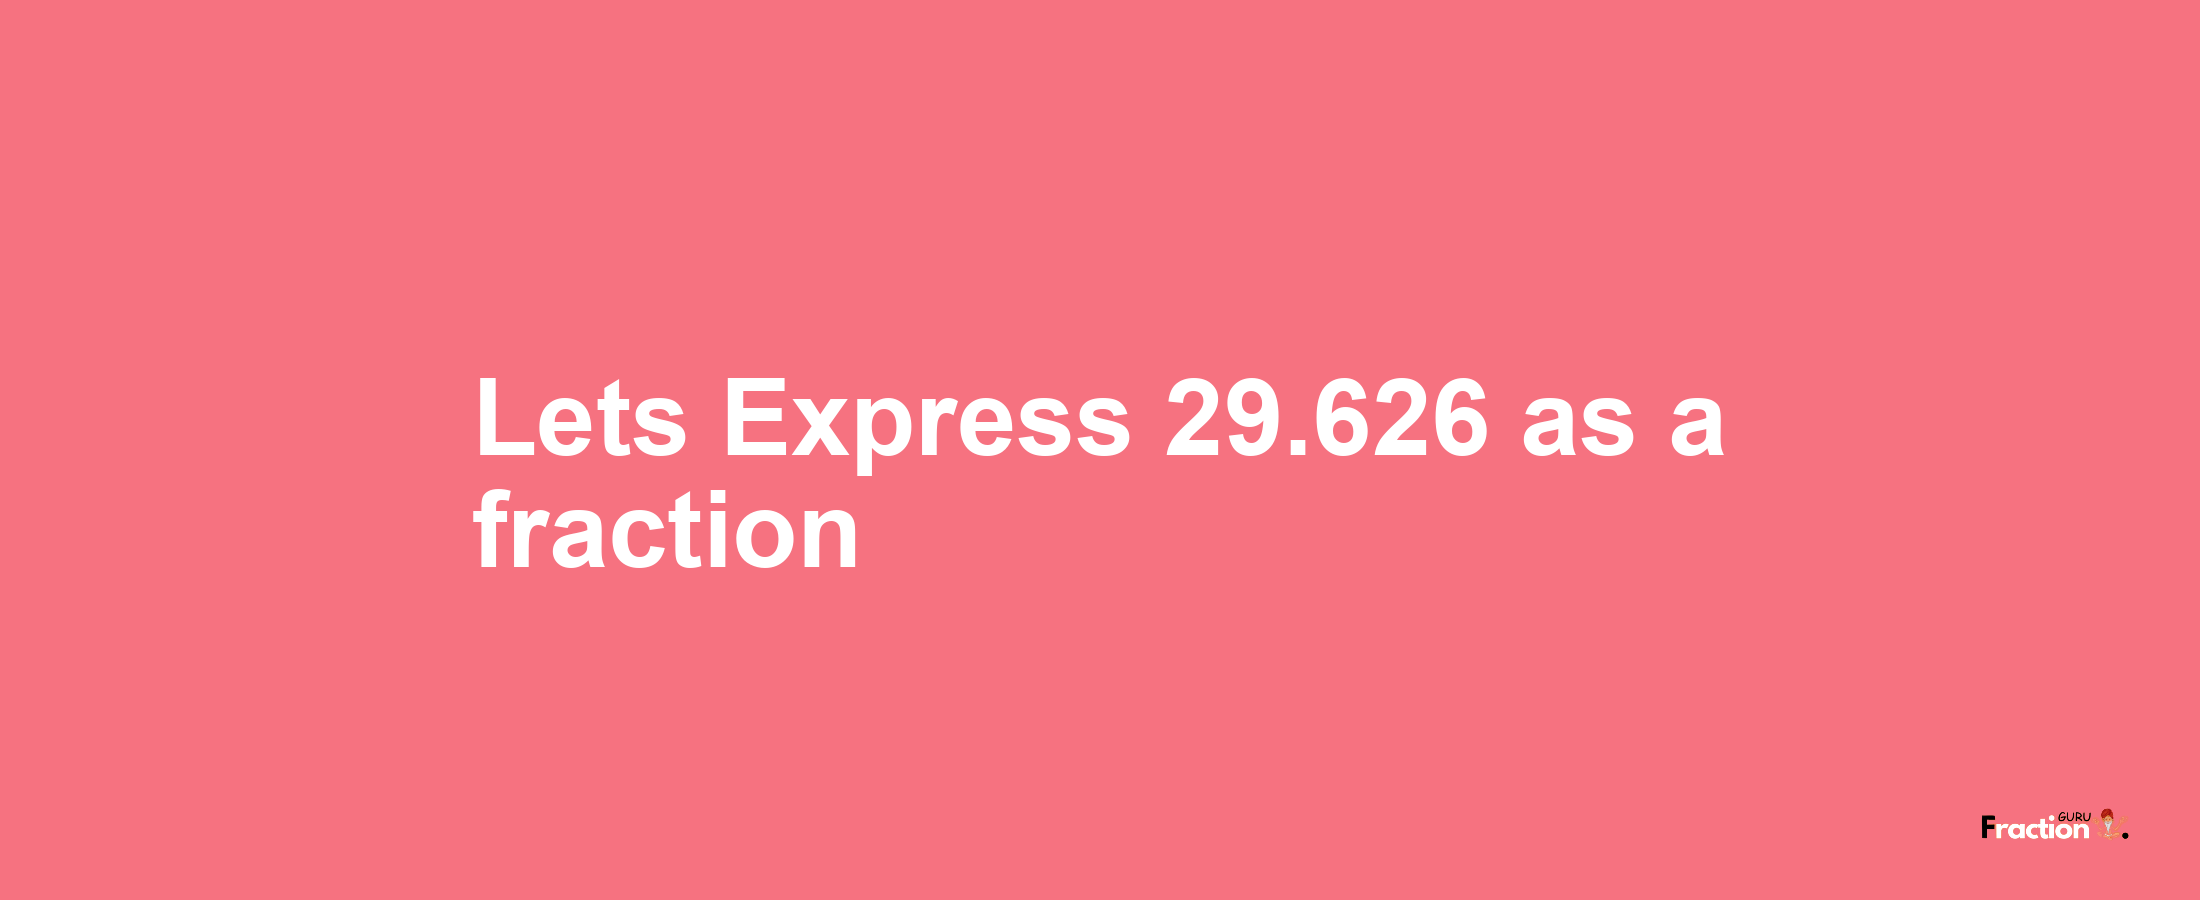 Lets Express 29.626 as afraction